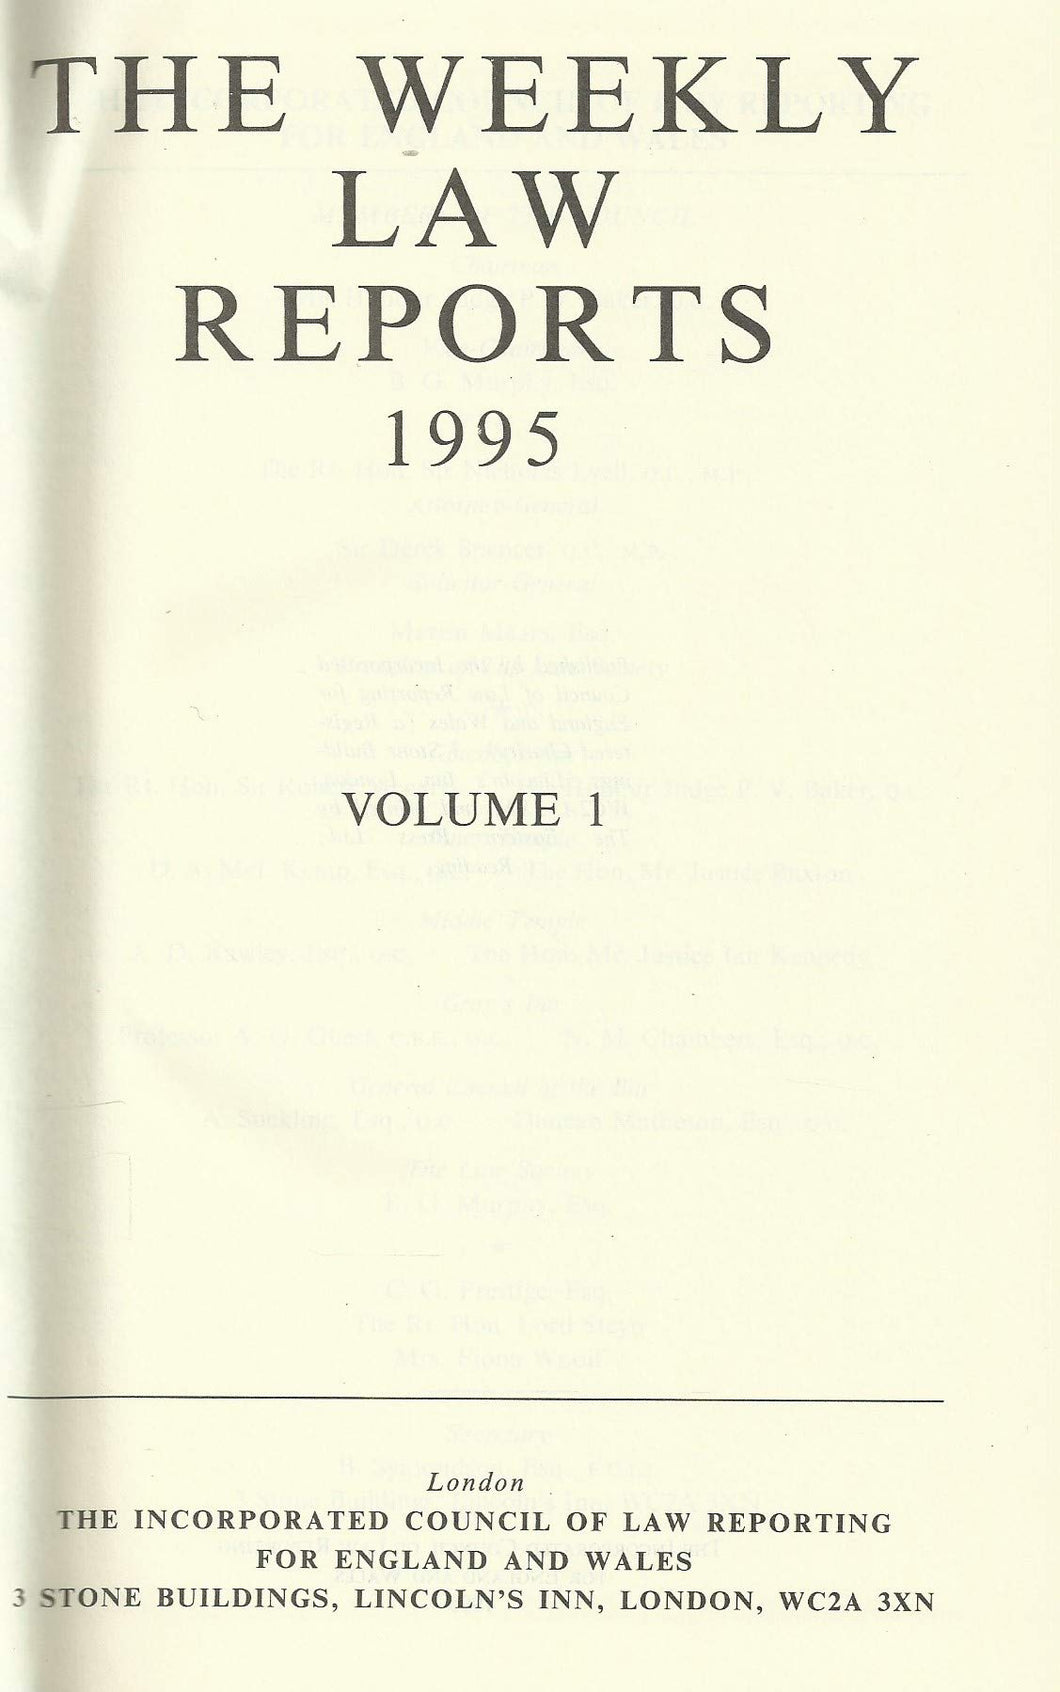 The Weekly Law Reports 1995, Volume I